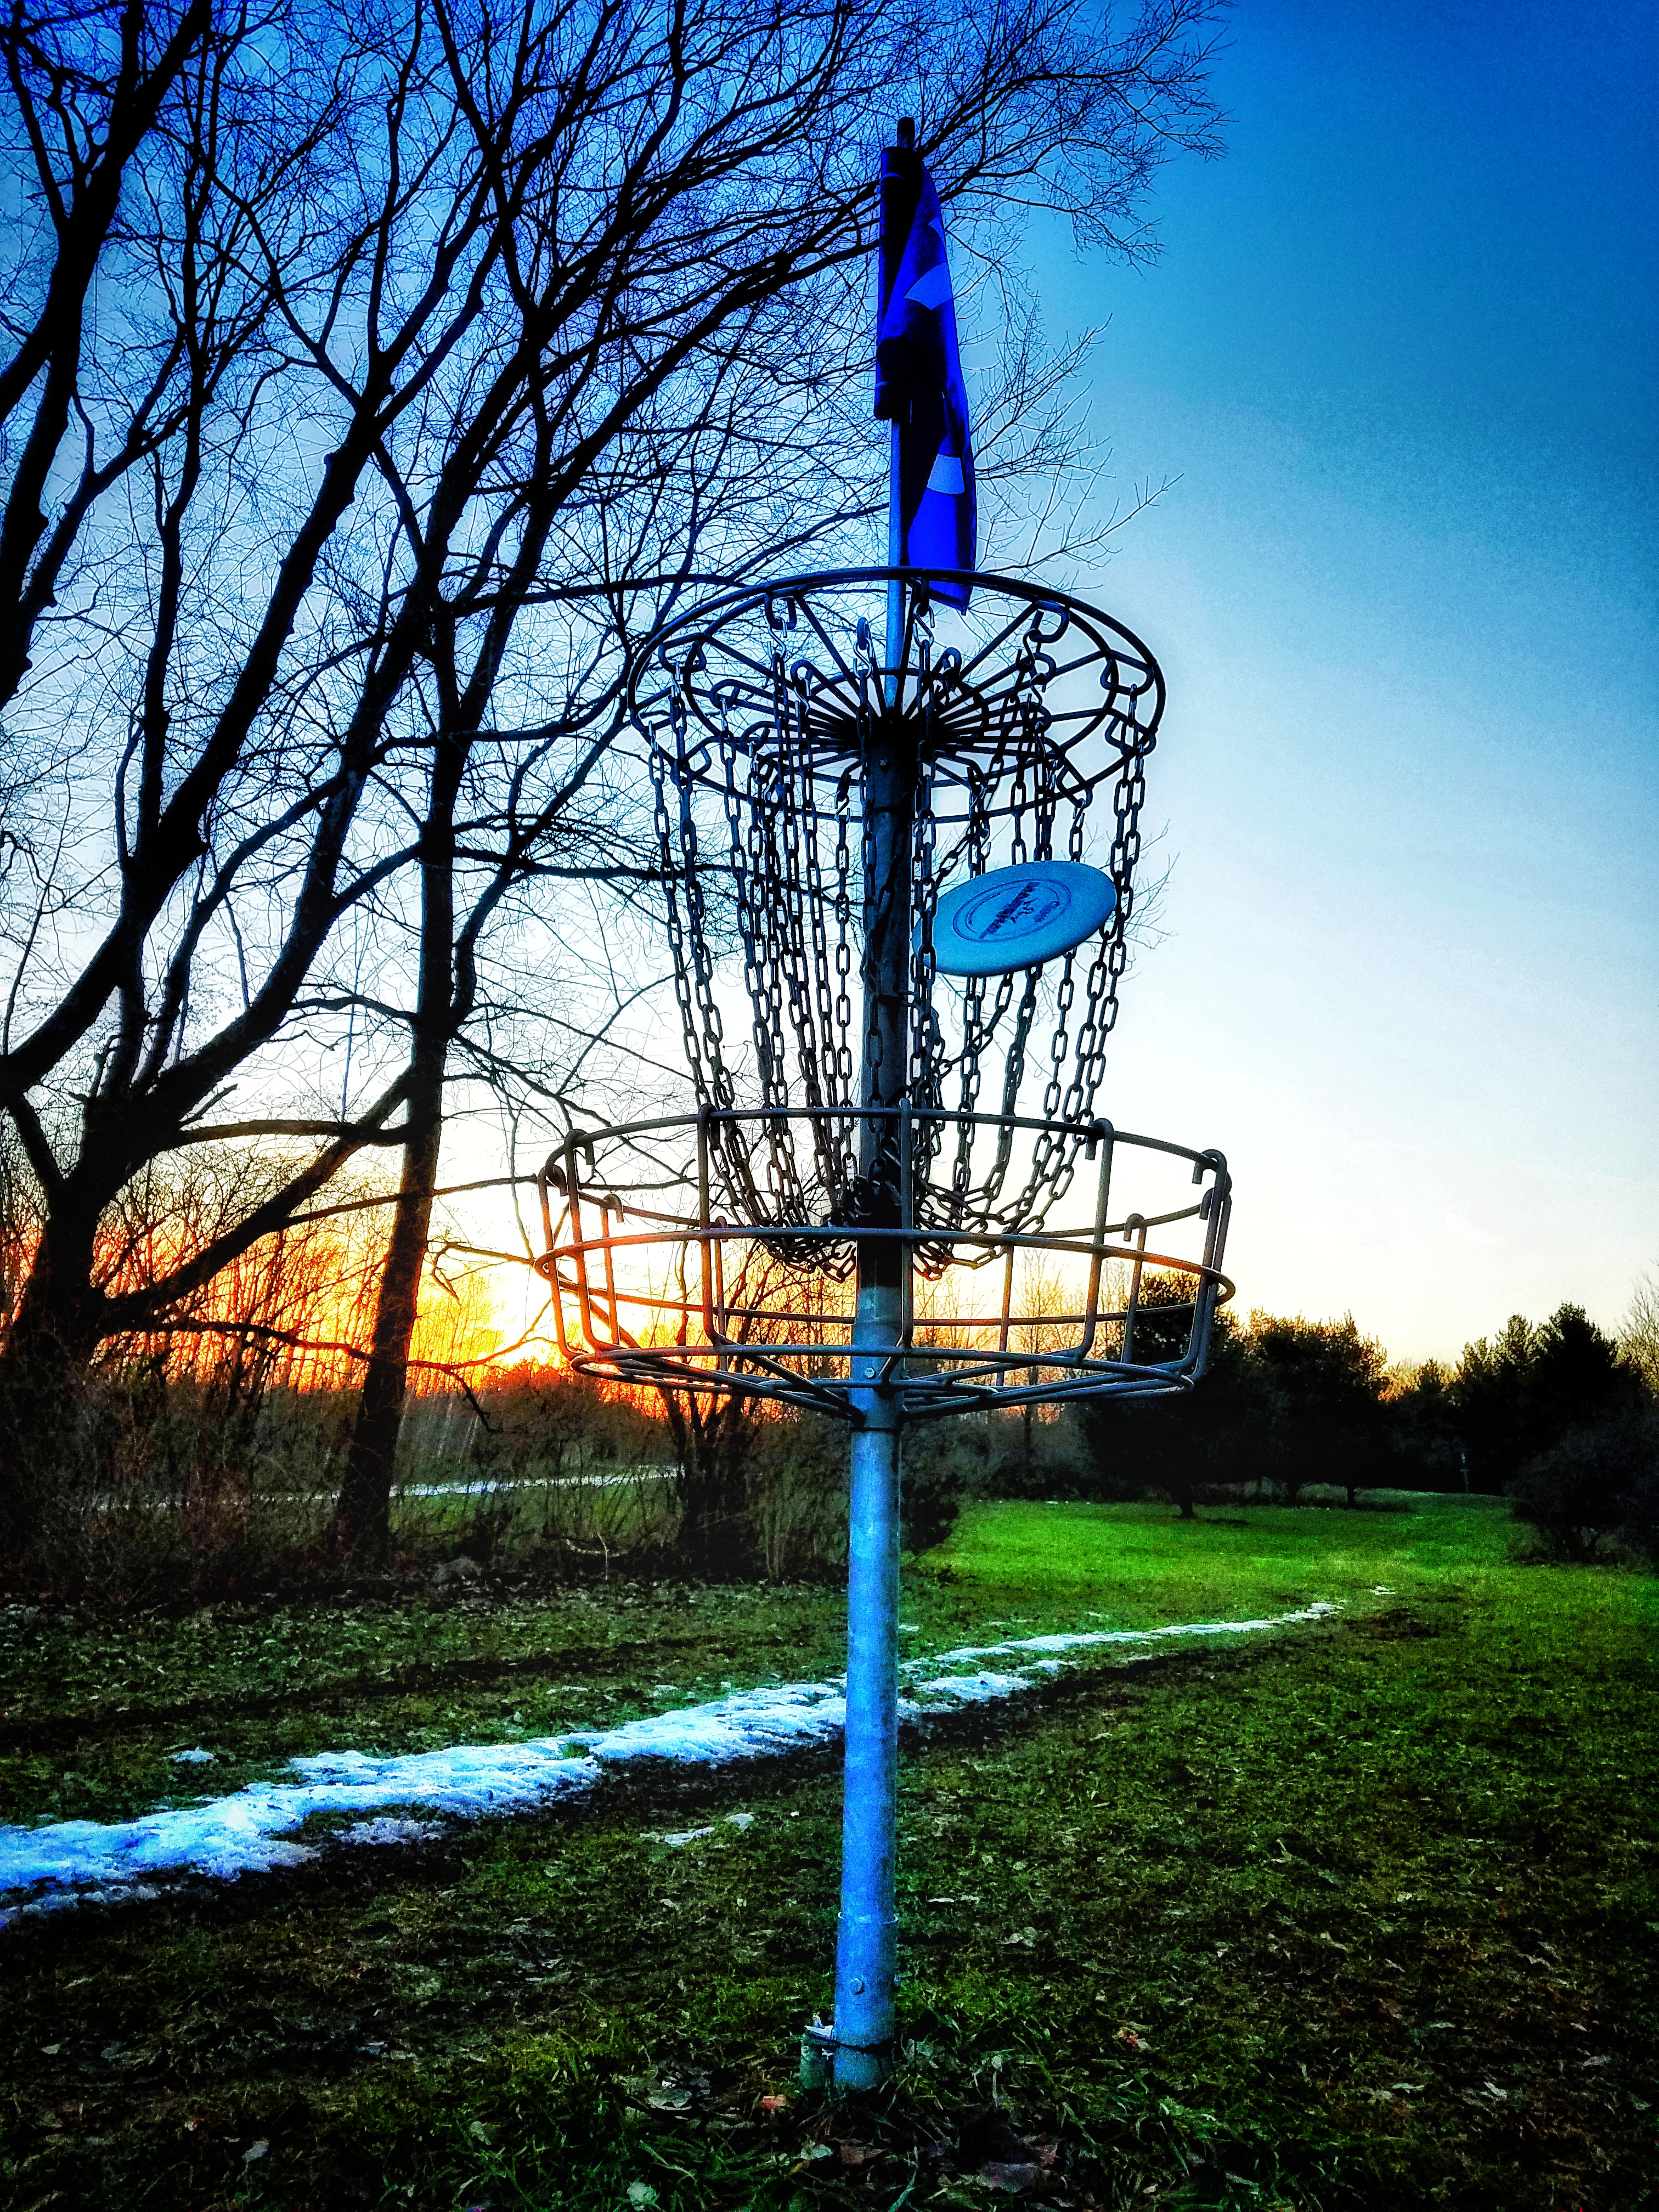 Winter Disc Golf Discs and Plastic Disc Golf Puttheads